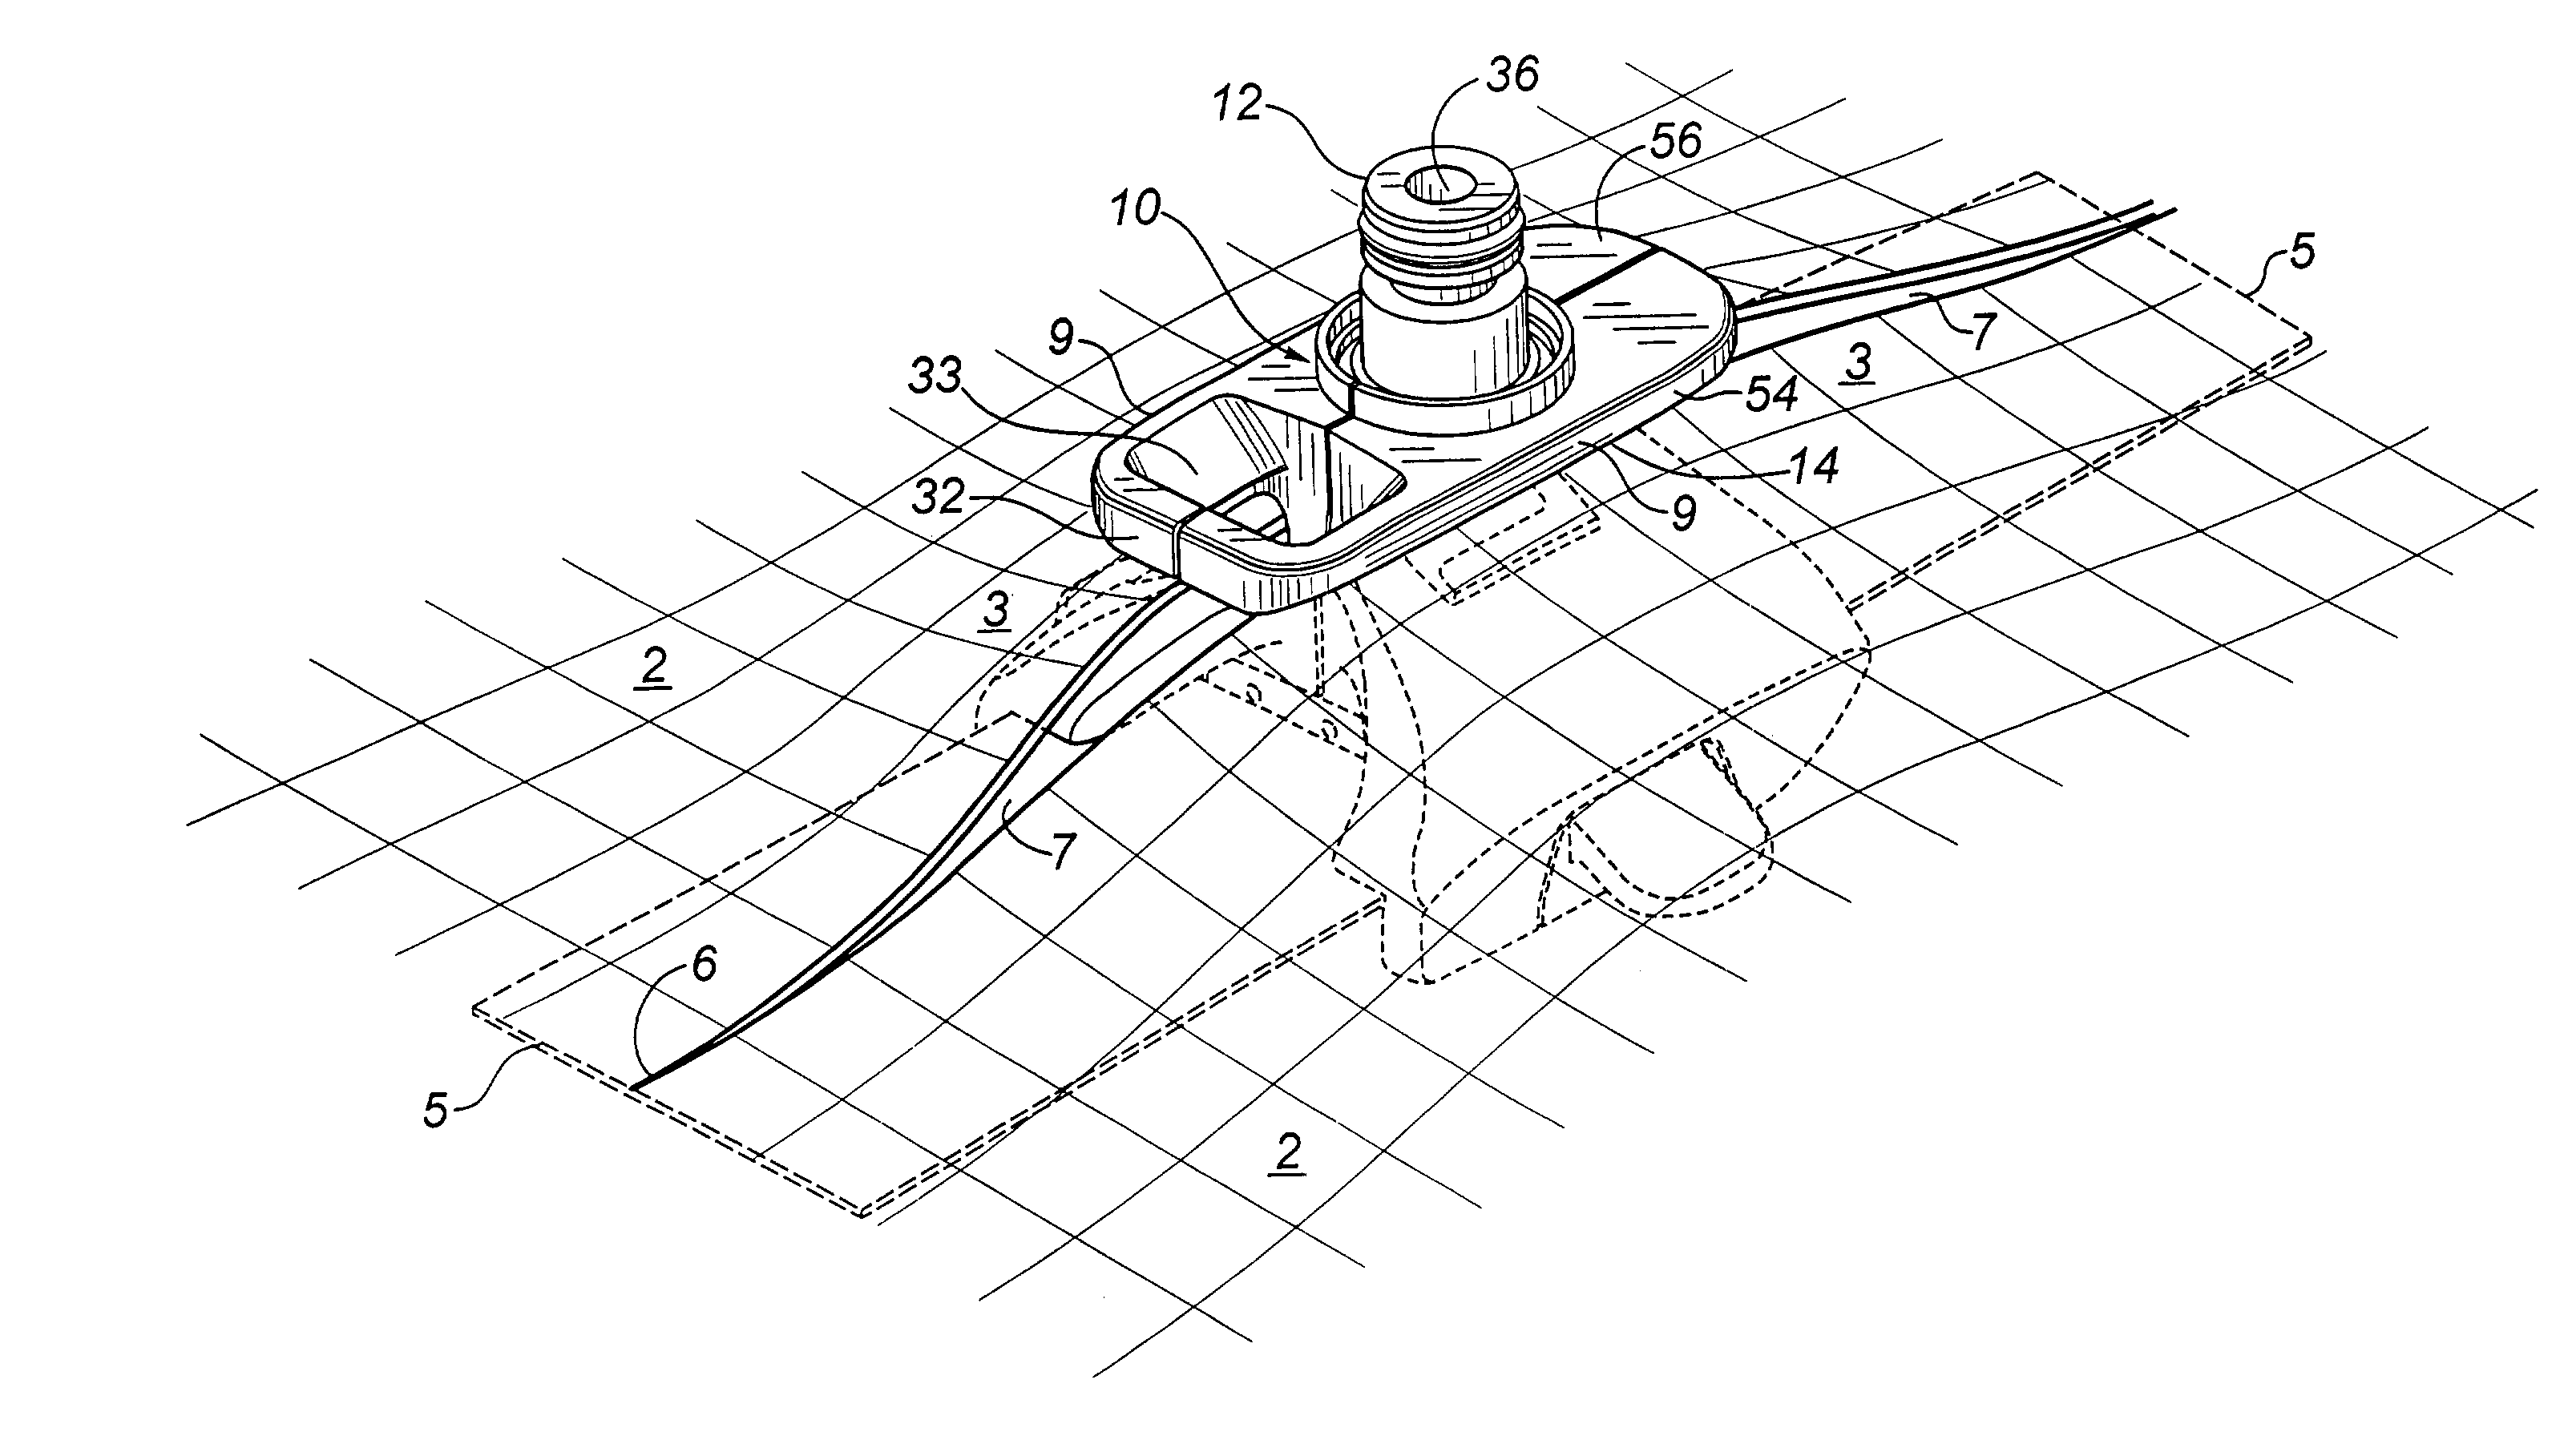 Method and apparatus for seaming abutting layers of planar material